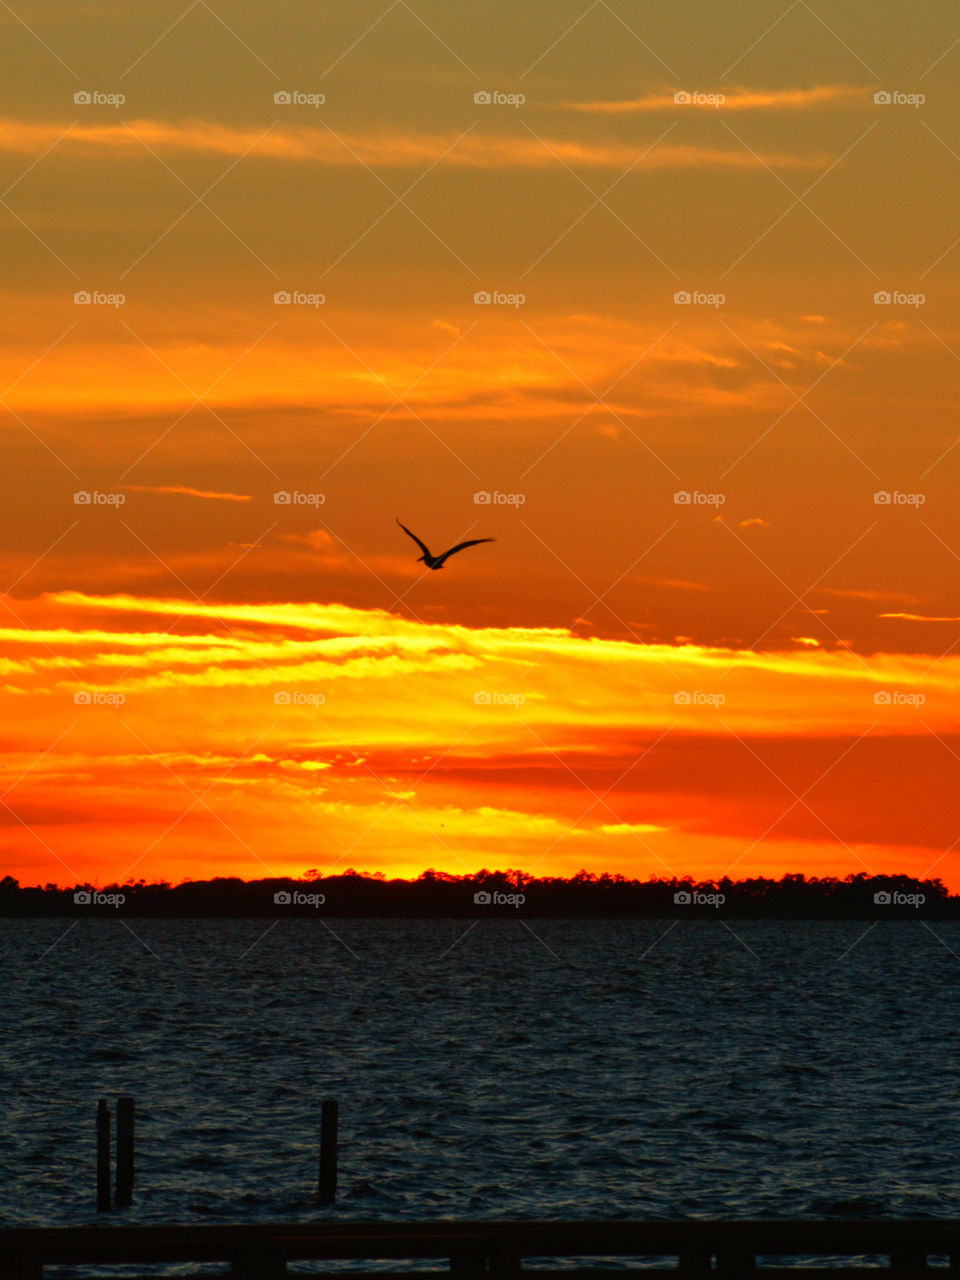 Pelican soaring in the sunset!
A bird flies over the Choctawhatchee Bay in the shimmering sunset!